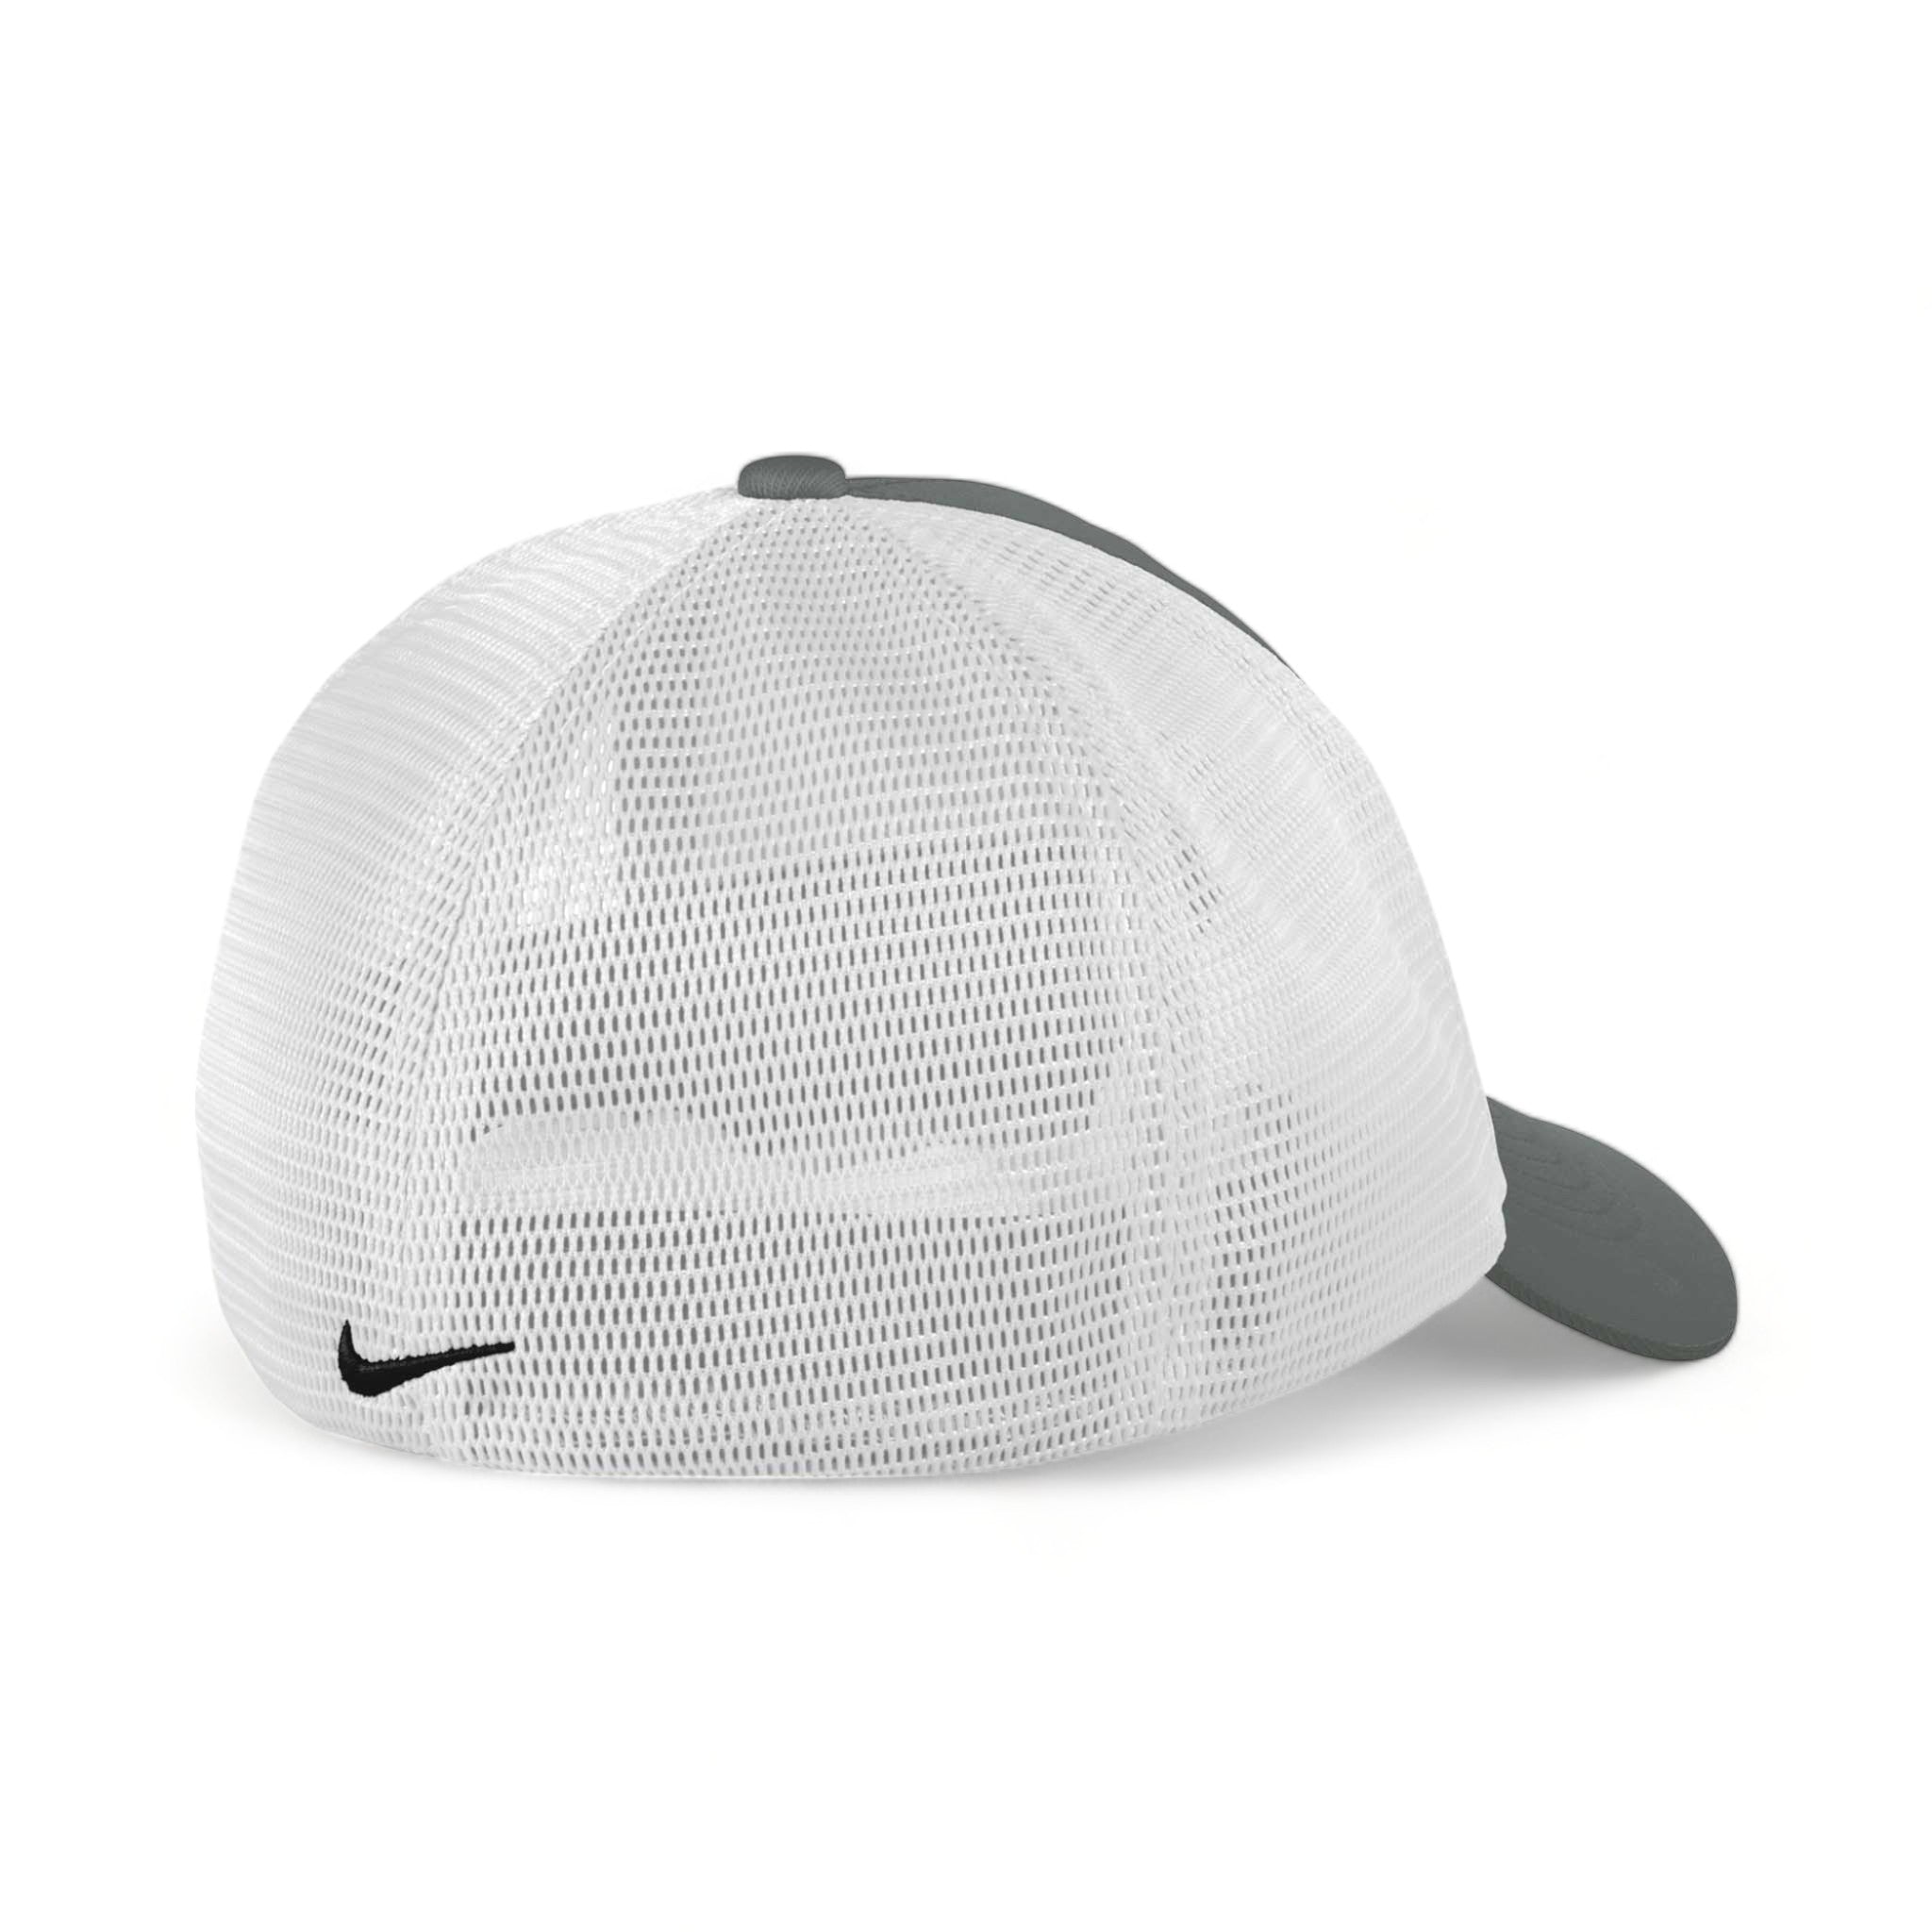 Back view of Nike NKFB6448 custom hat in anthracite and white